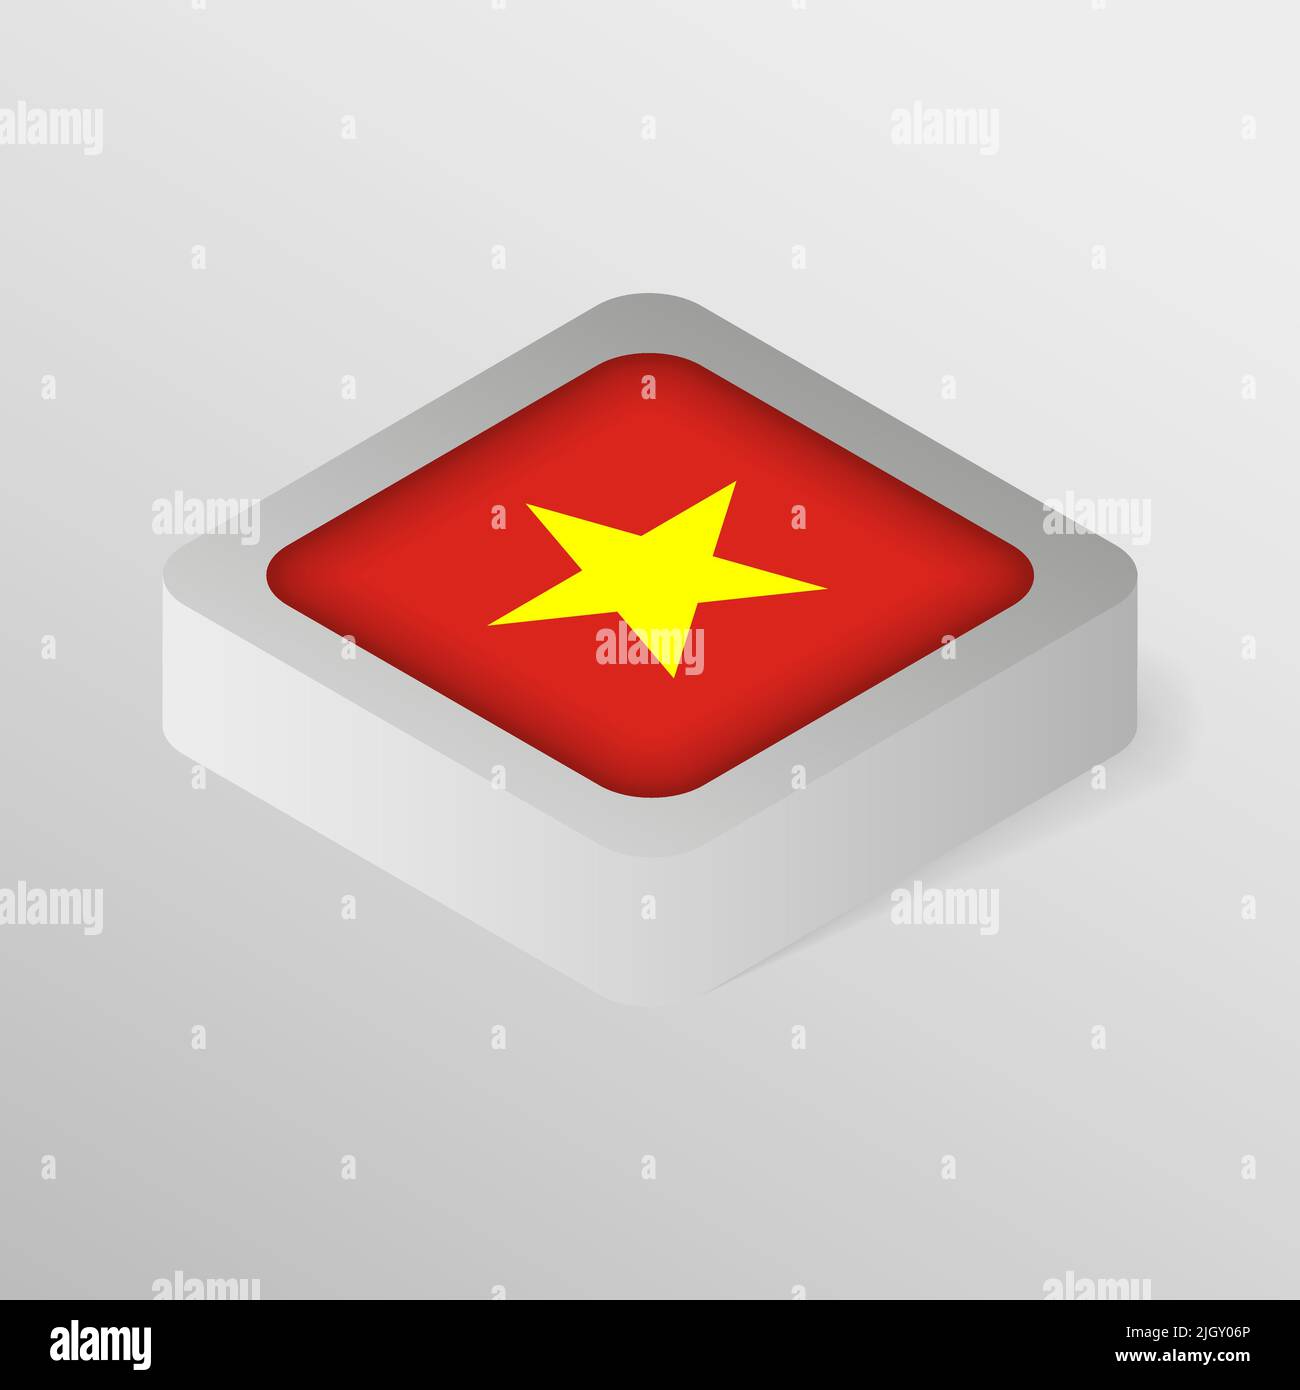 EPS10 Vector Patriotic shield with flag of Vietnam. An element of impact for the use you want to make of it. Stock Vector